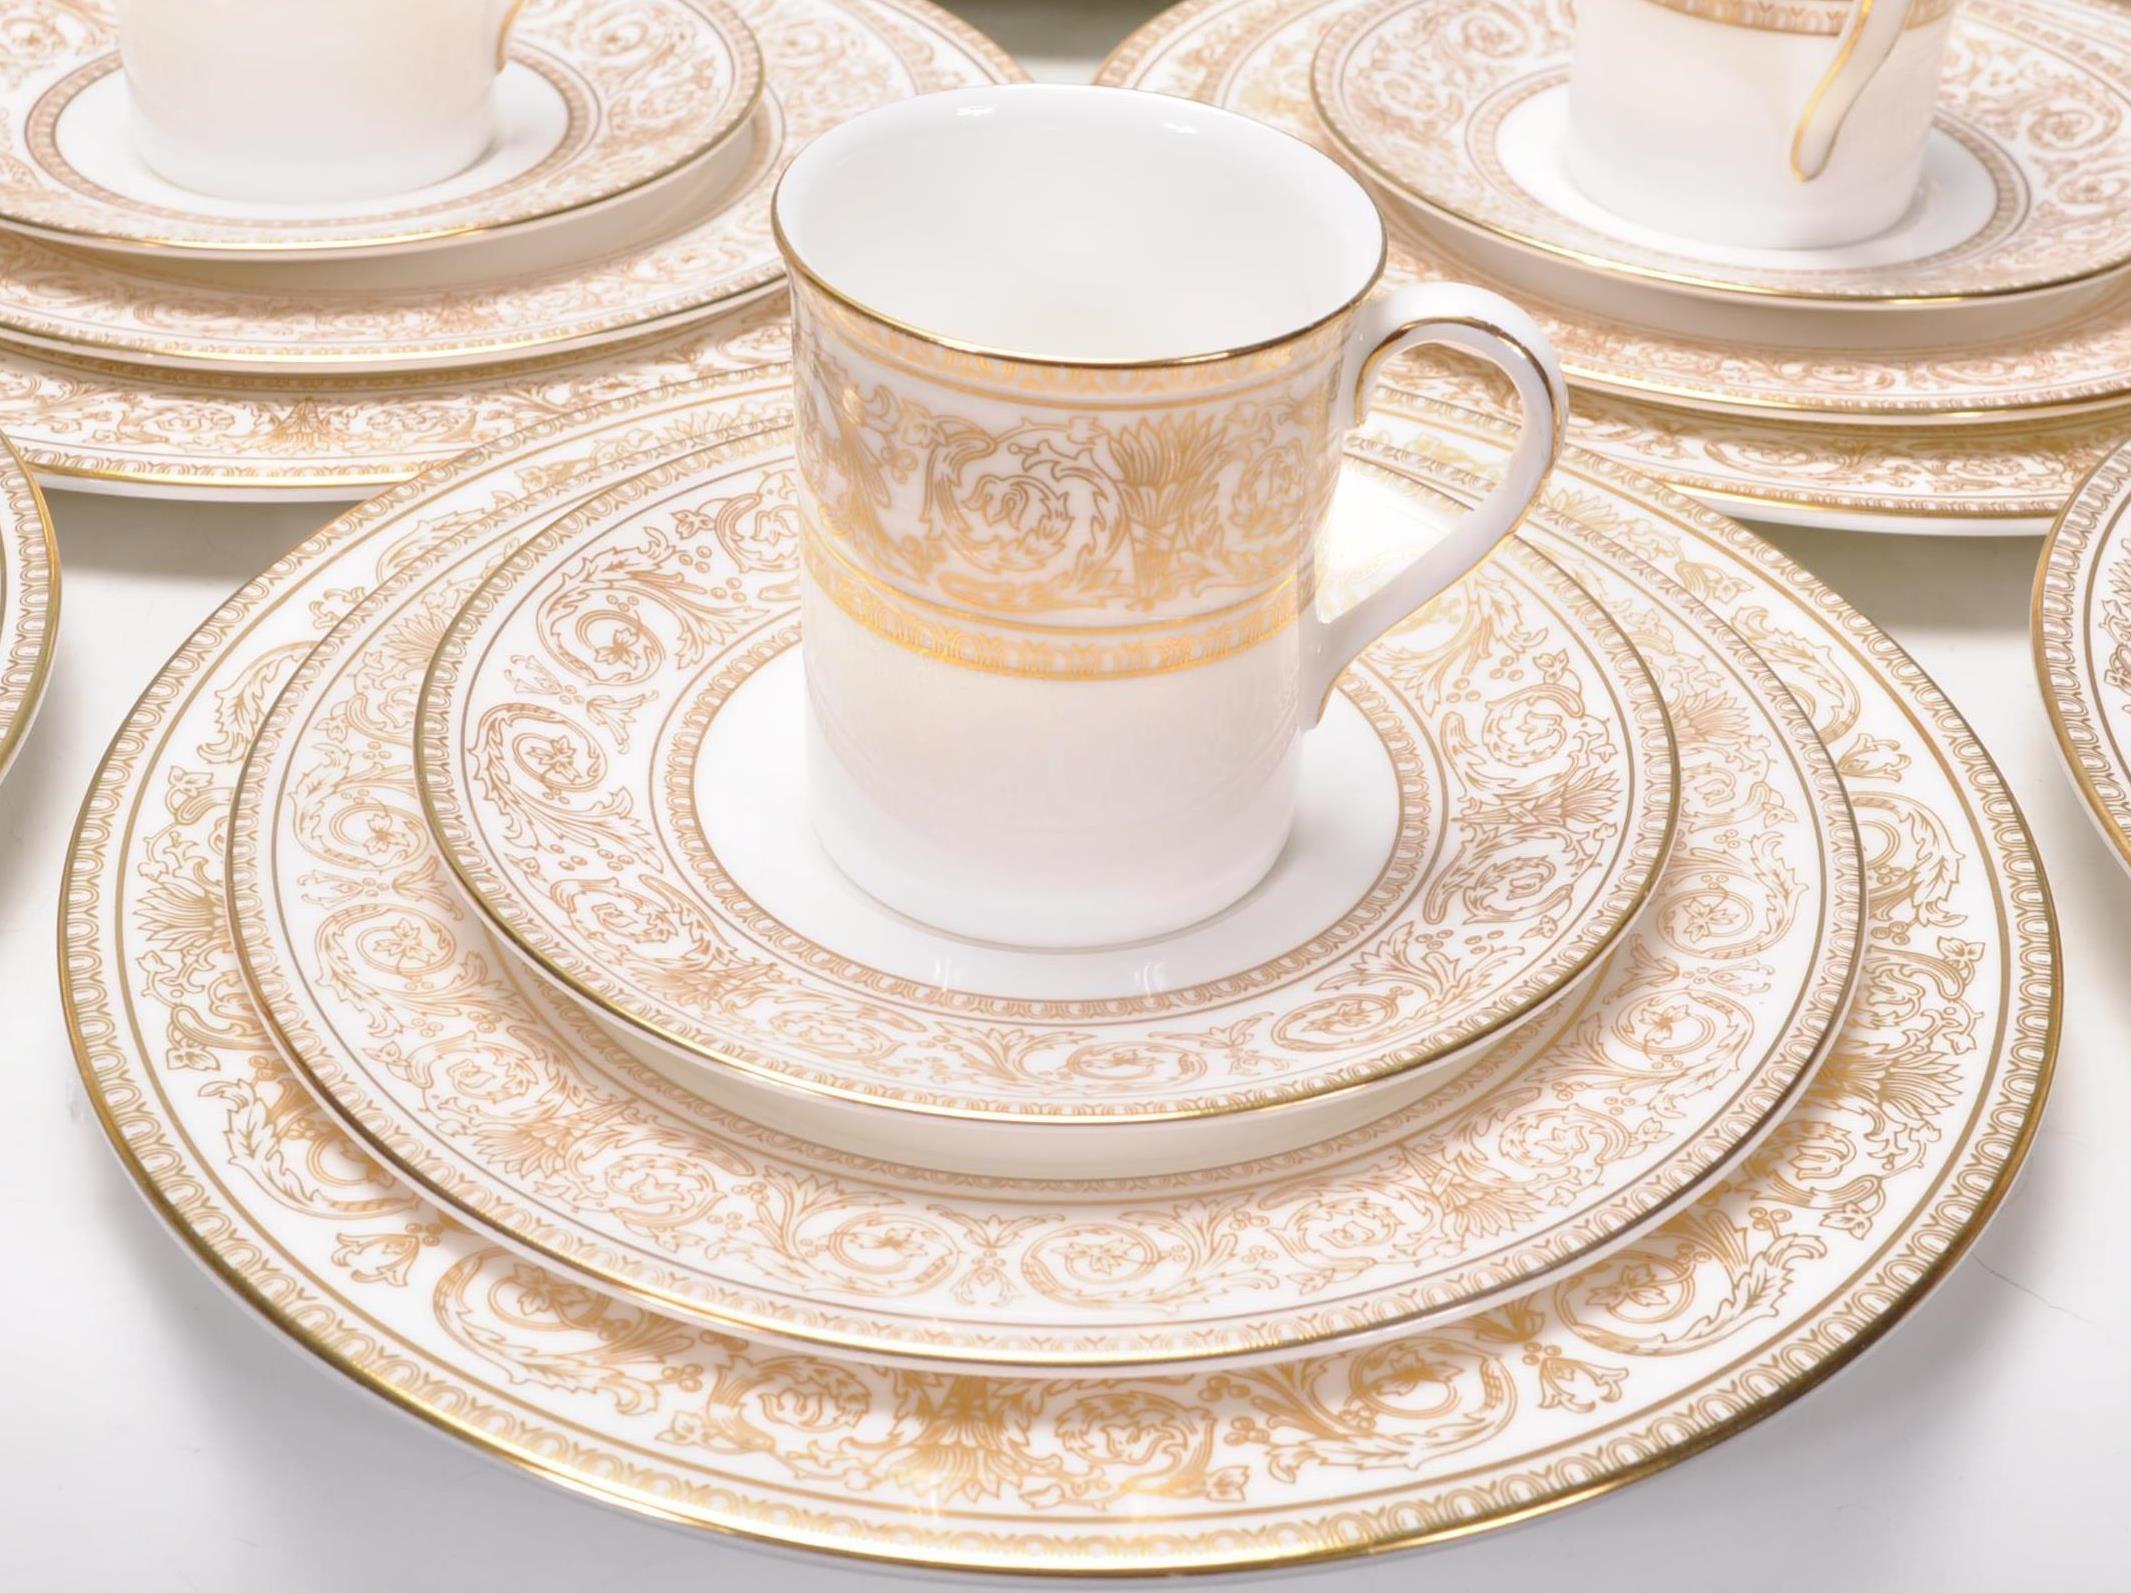 Royal Doulton Sovereign - A good Fine Bone China English coffee service by Royal Doulton in the - Image 8 of 9